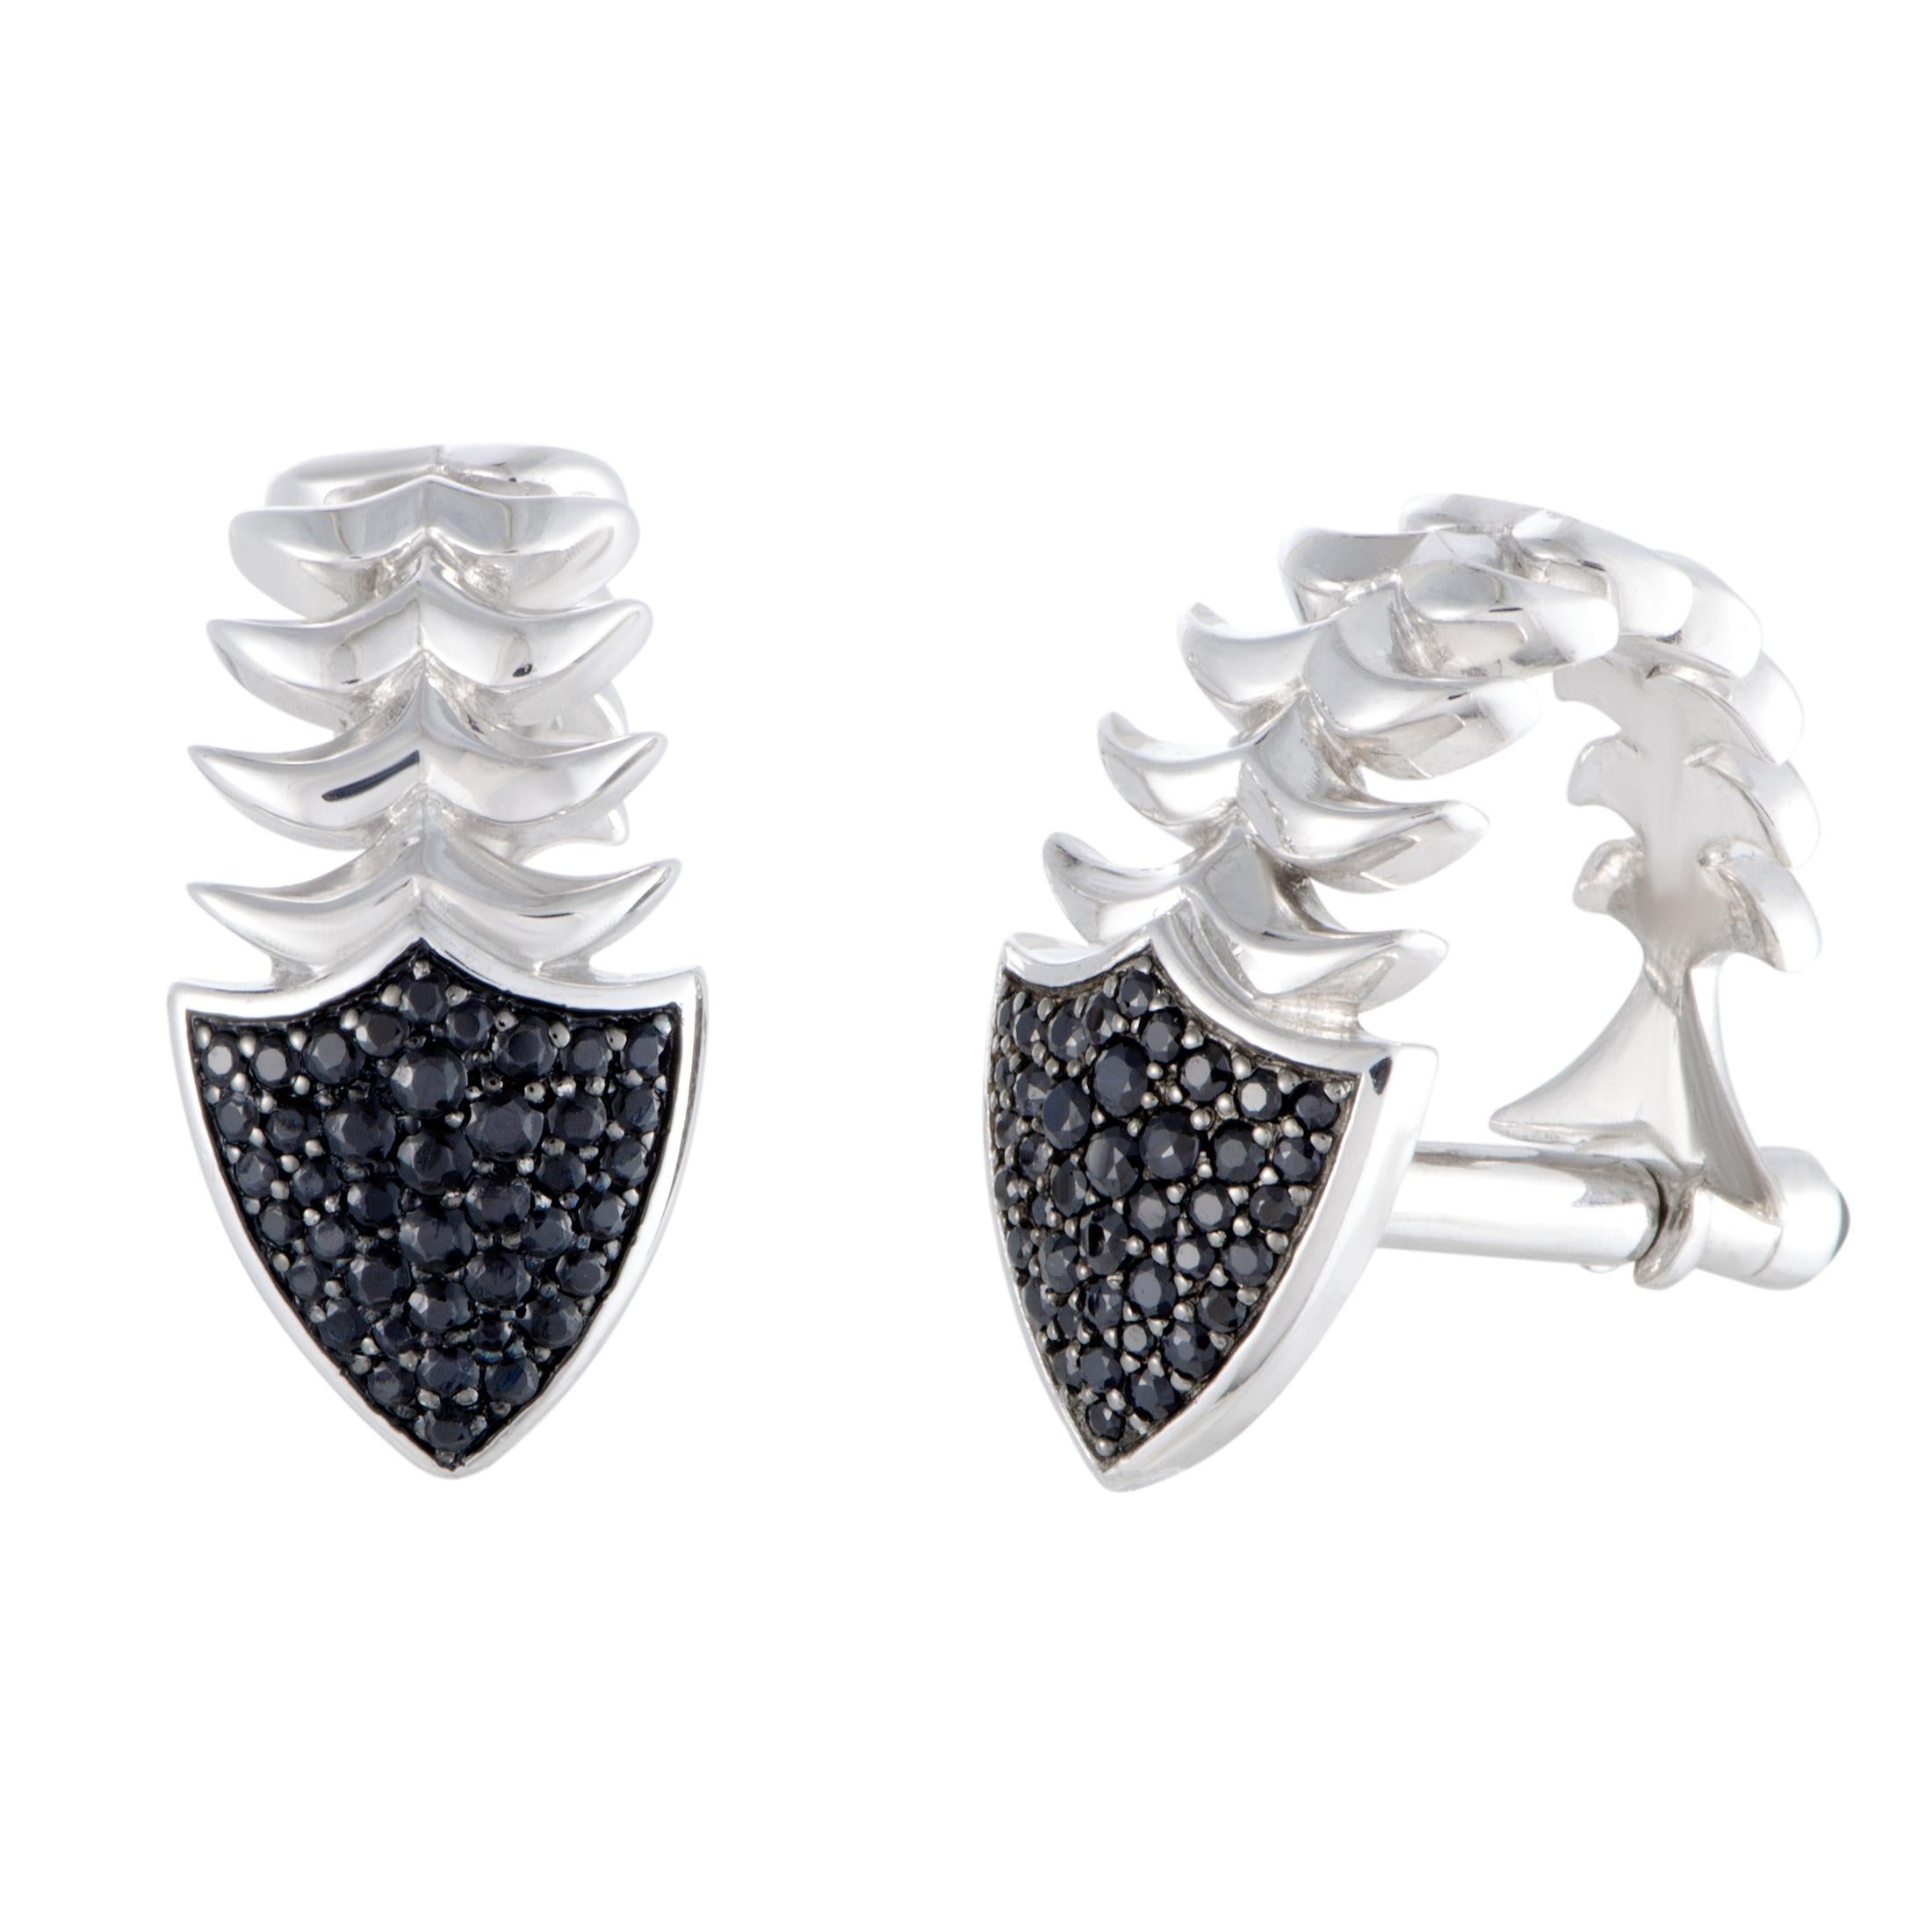 Stephen Webster Men��’s Silver and Black Sapphire Pave Pisces Cufflinks